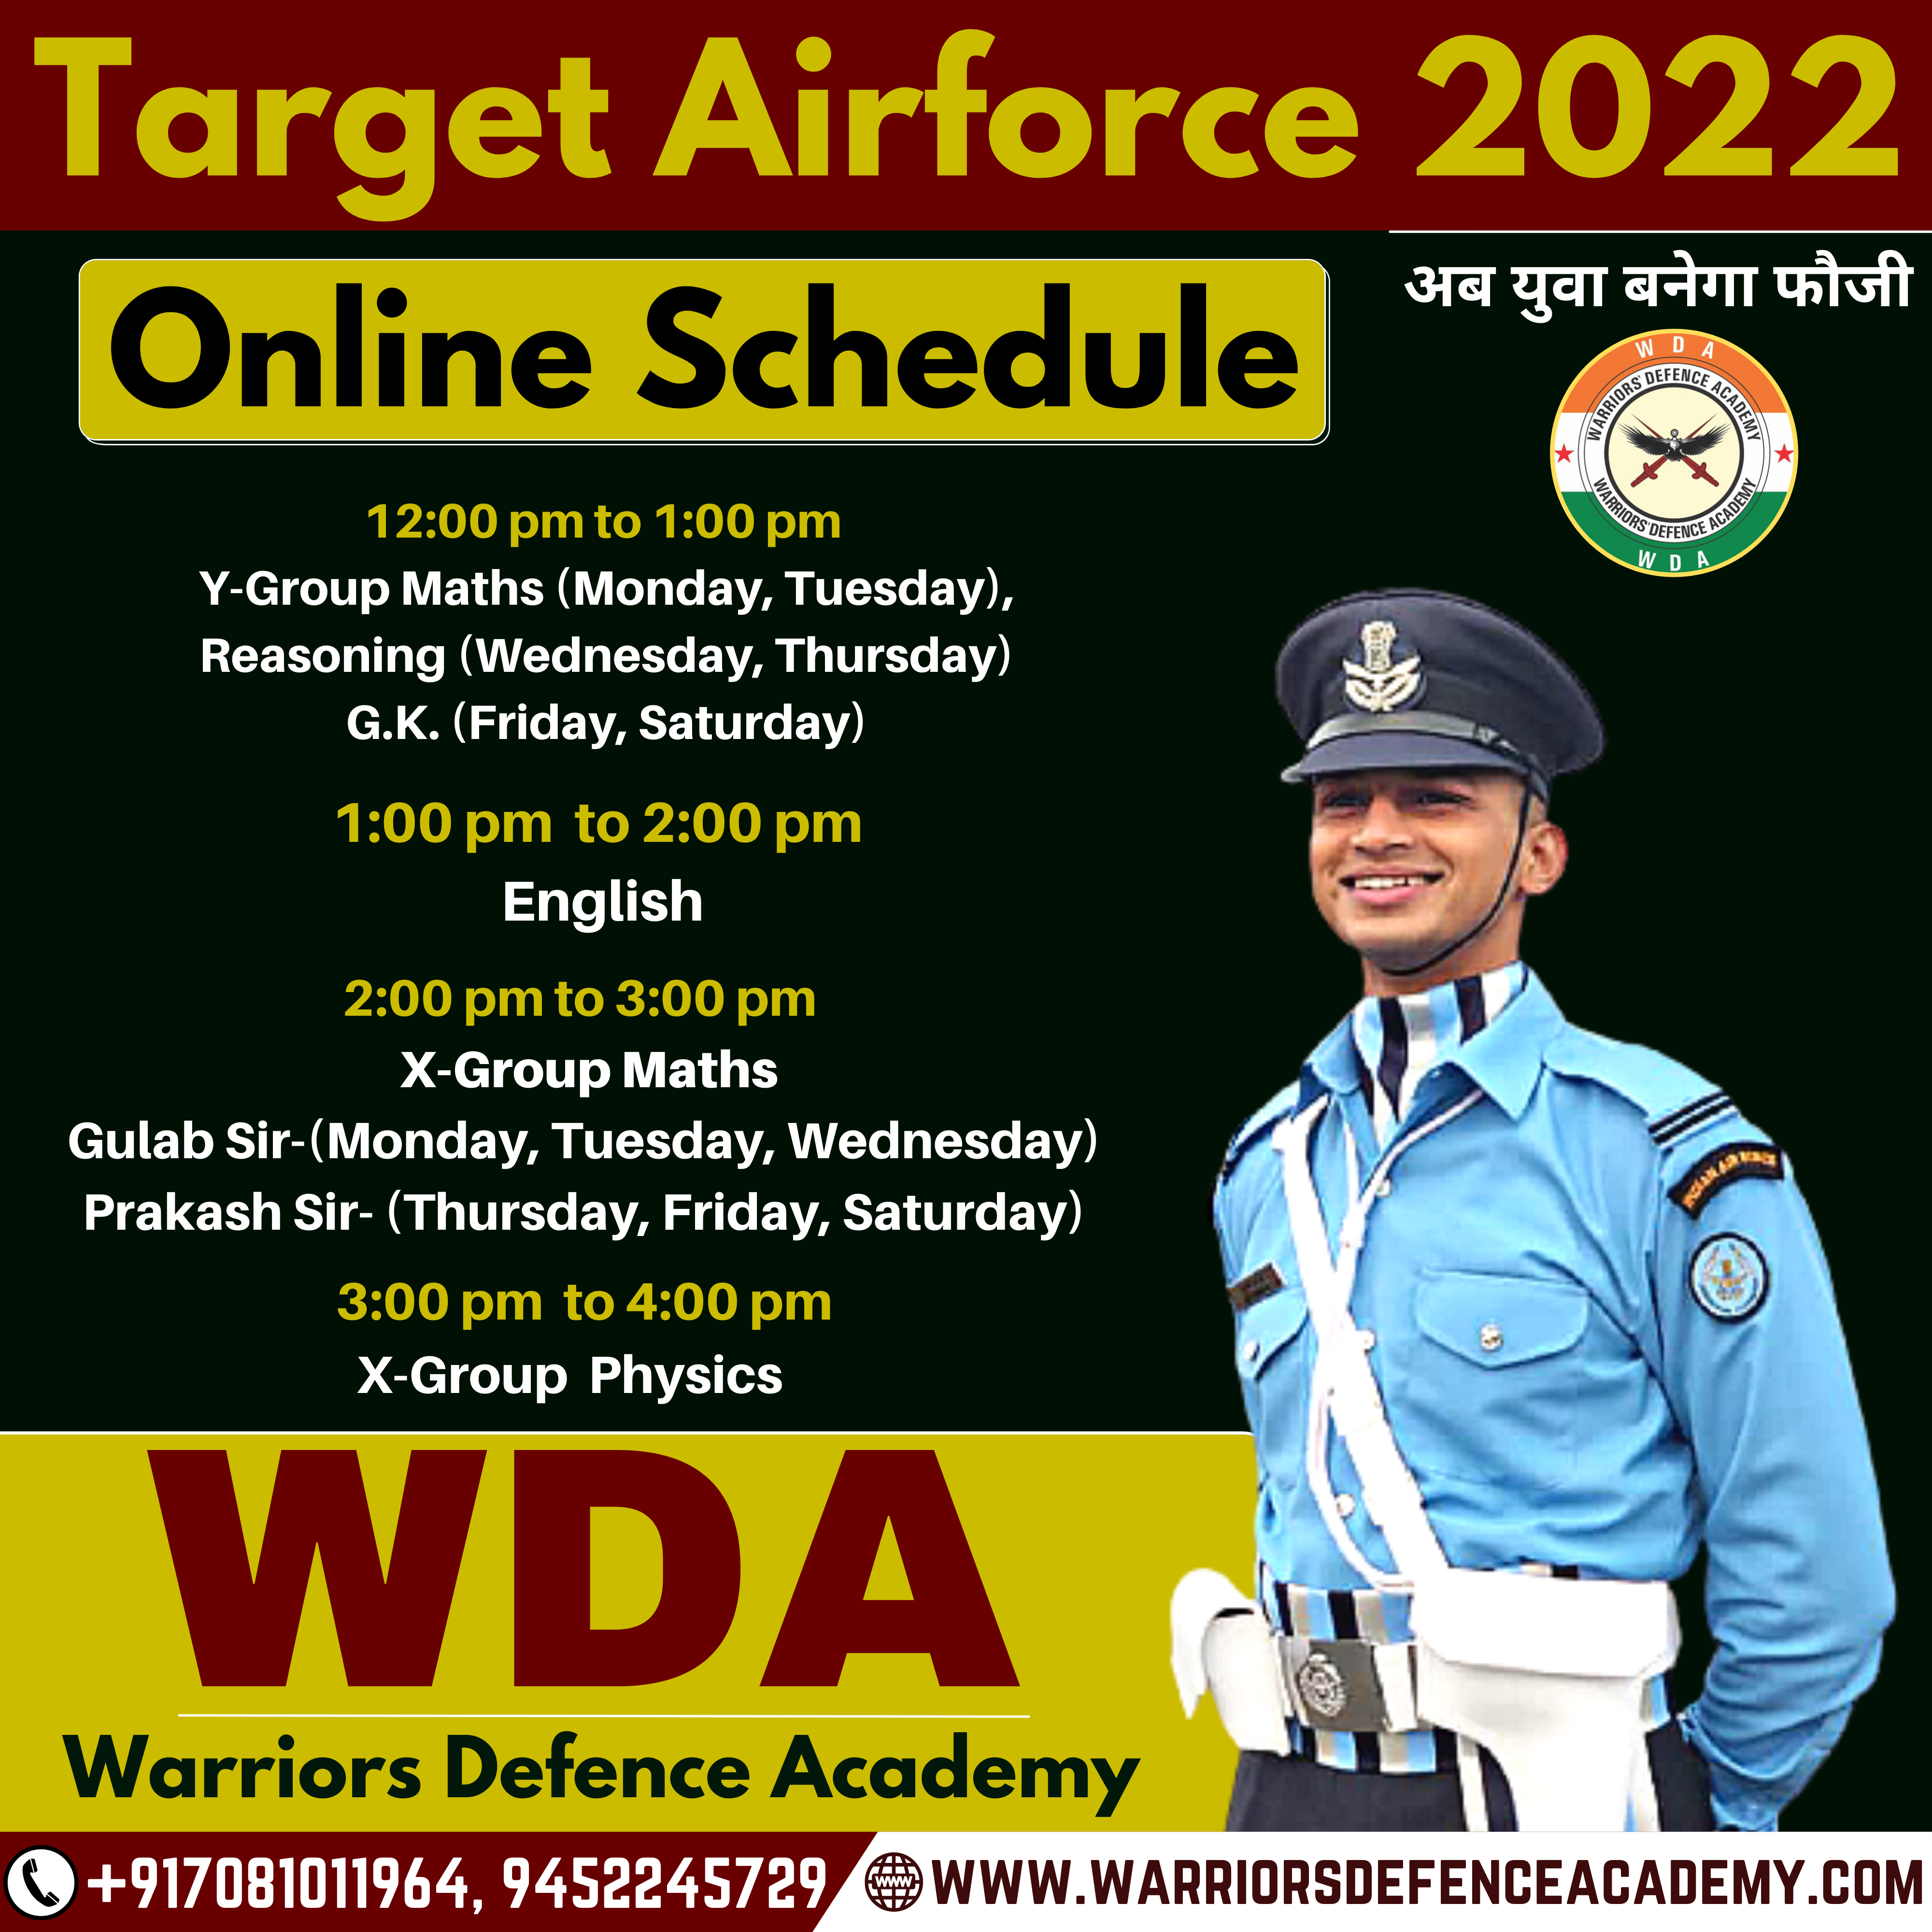 Free Online NDA Classes Youtube| Best Defence Coaching in Lucknow